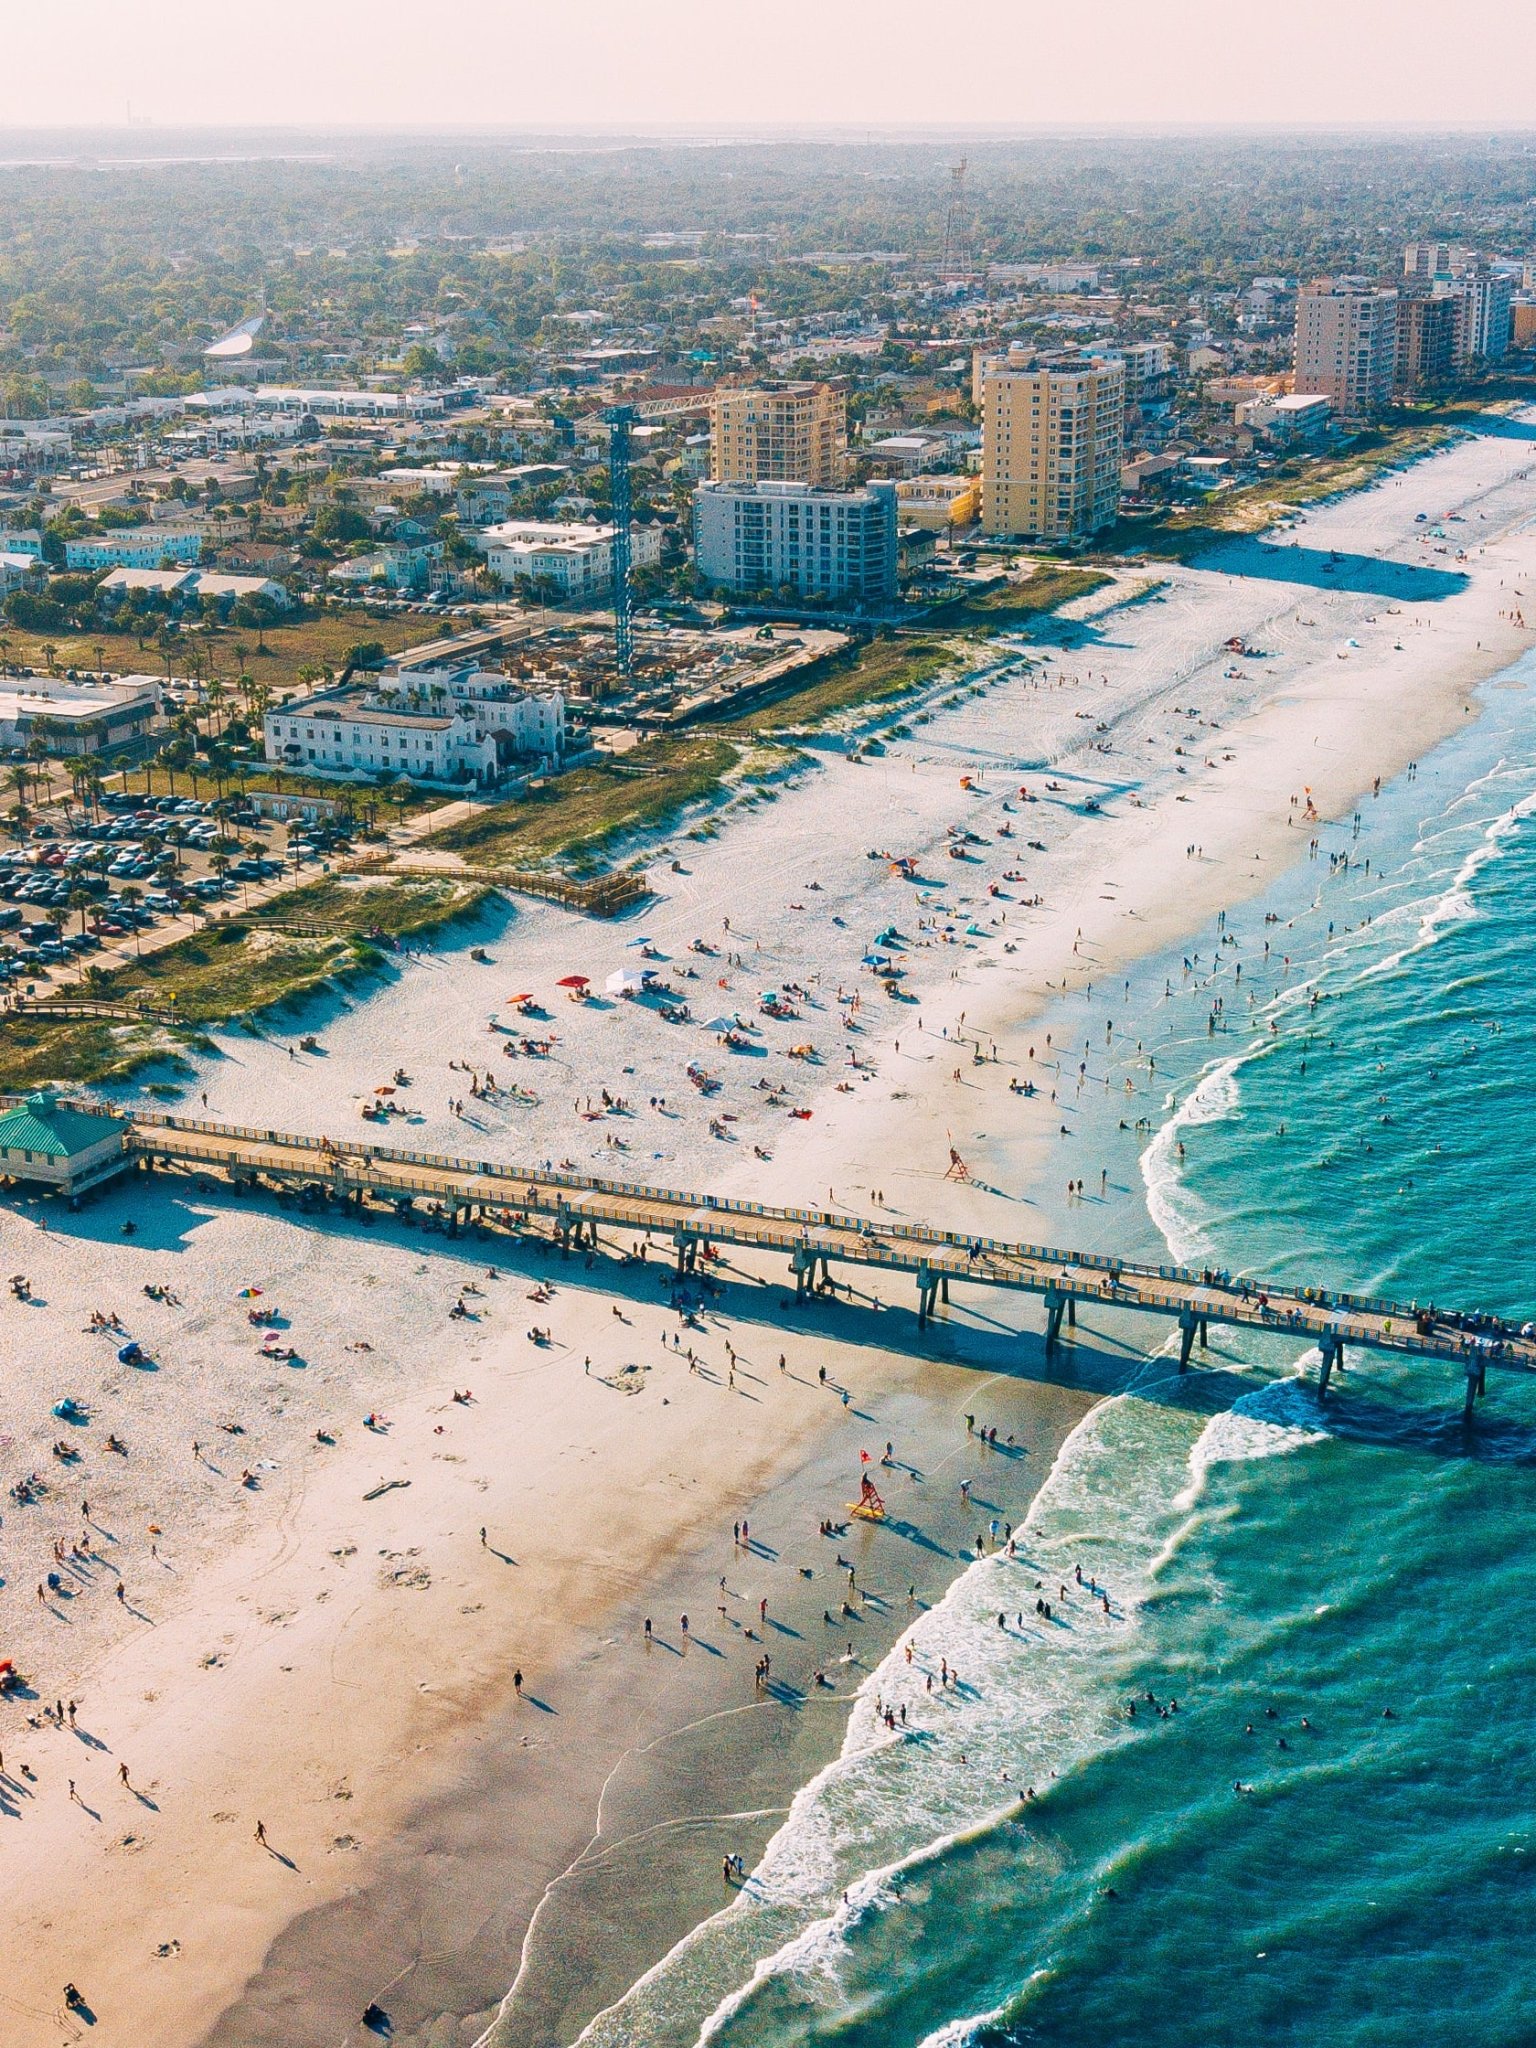 17 Awesome Cities to Visit in Florida